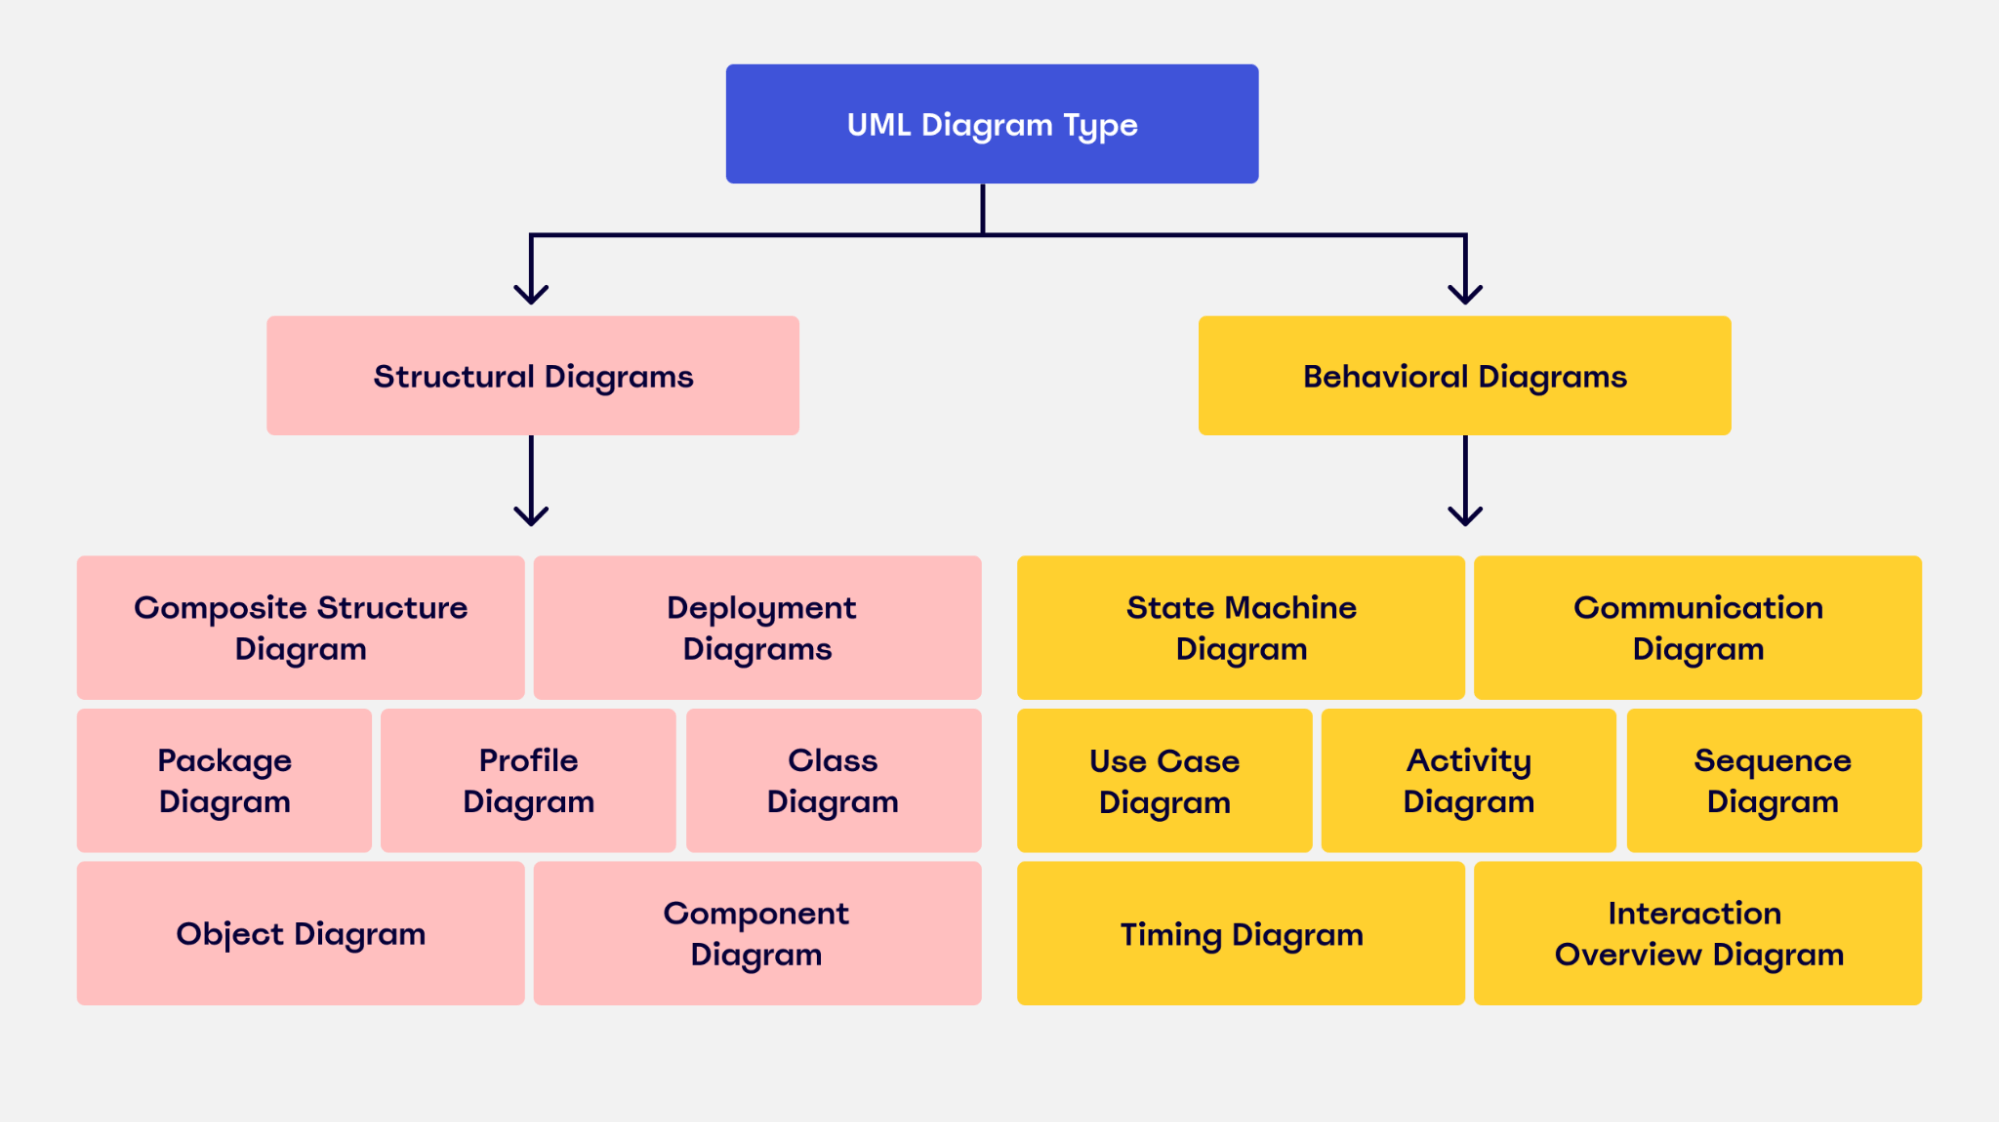 Flowchart depicting the different types of UML diagrams